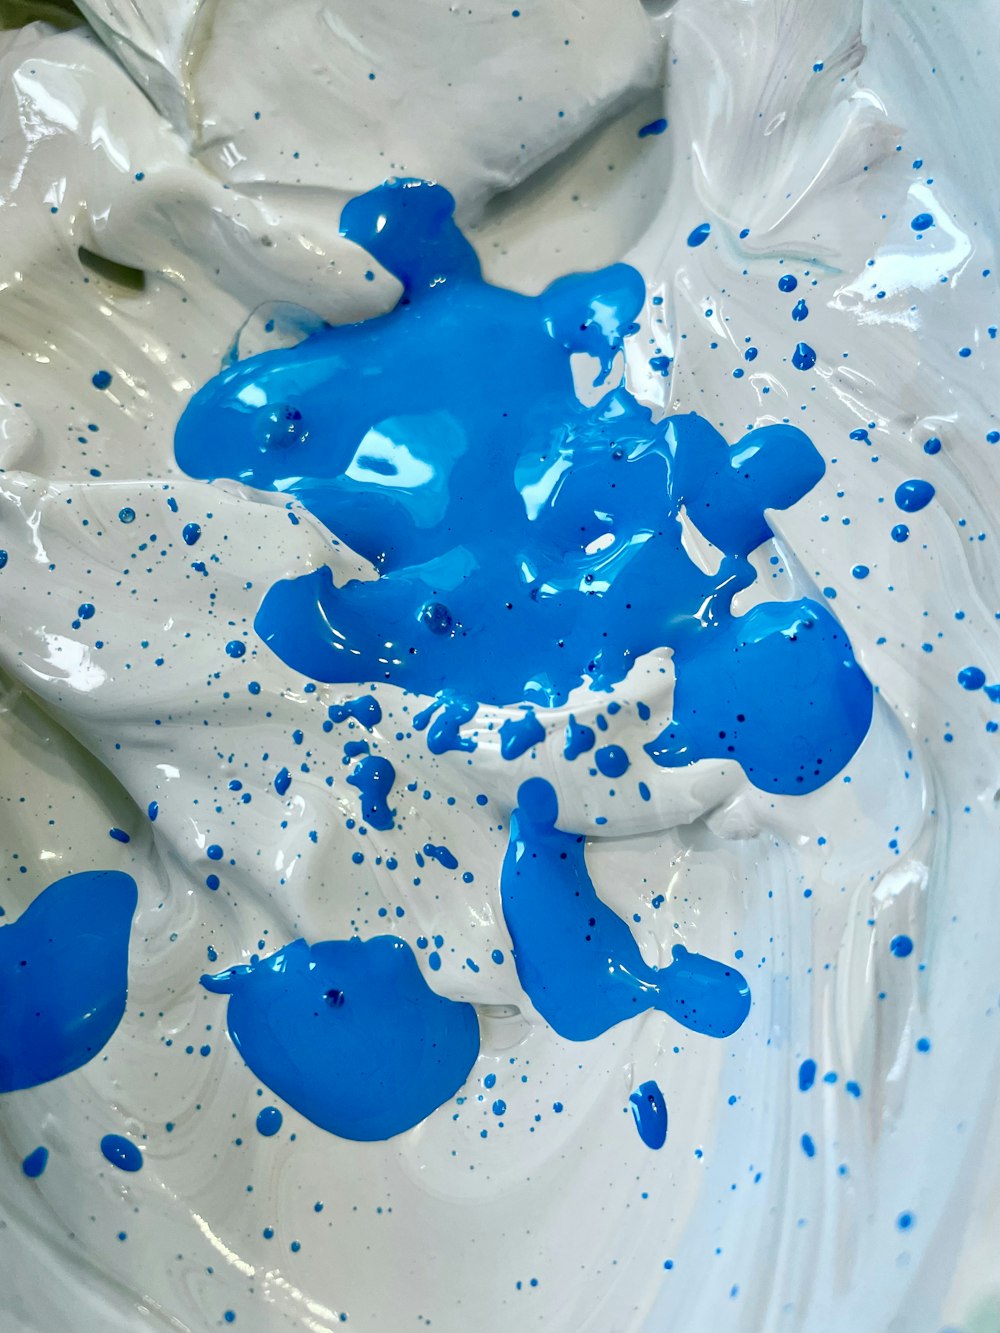 blue and white paint is in a bowl